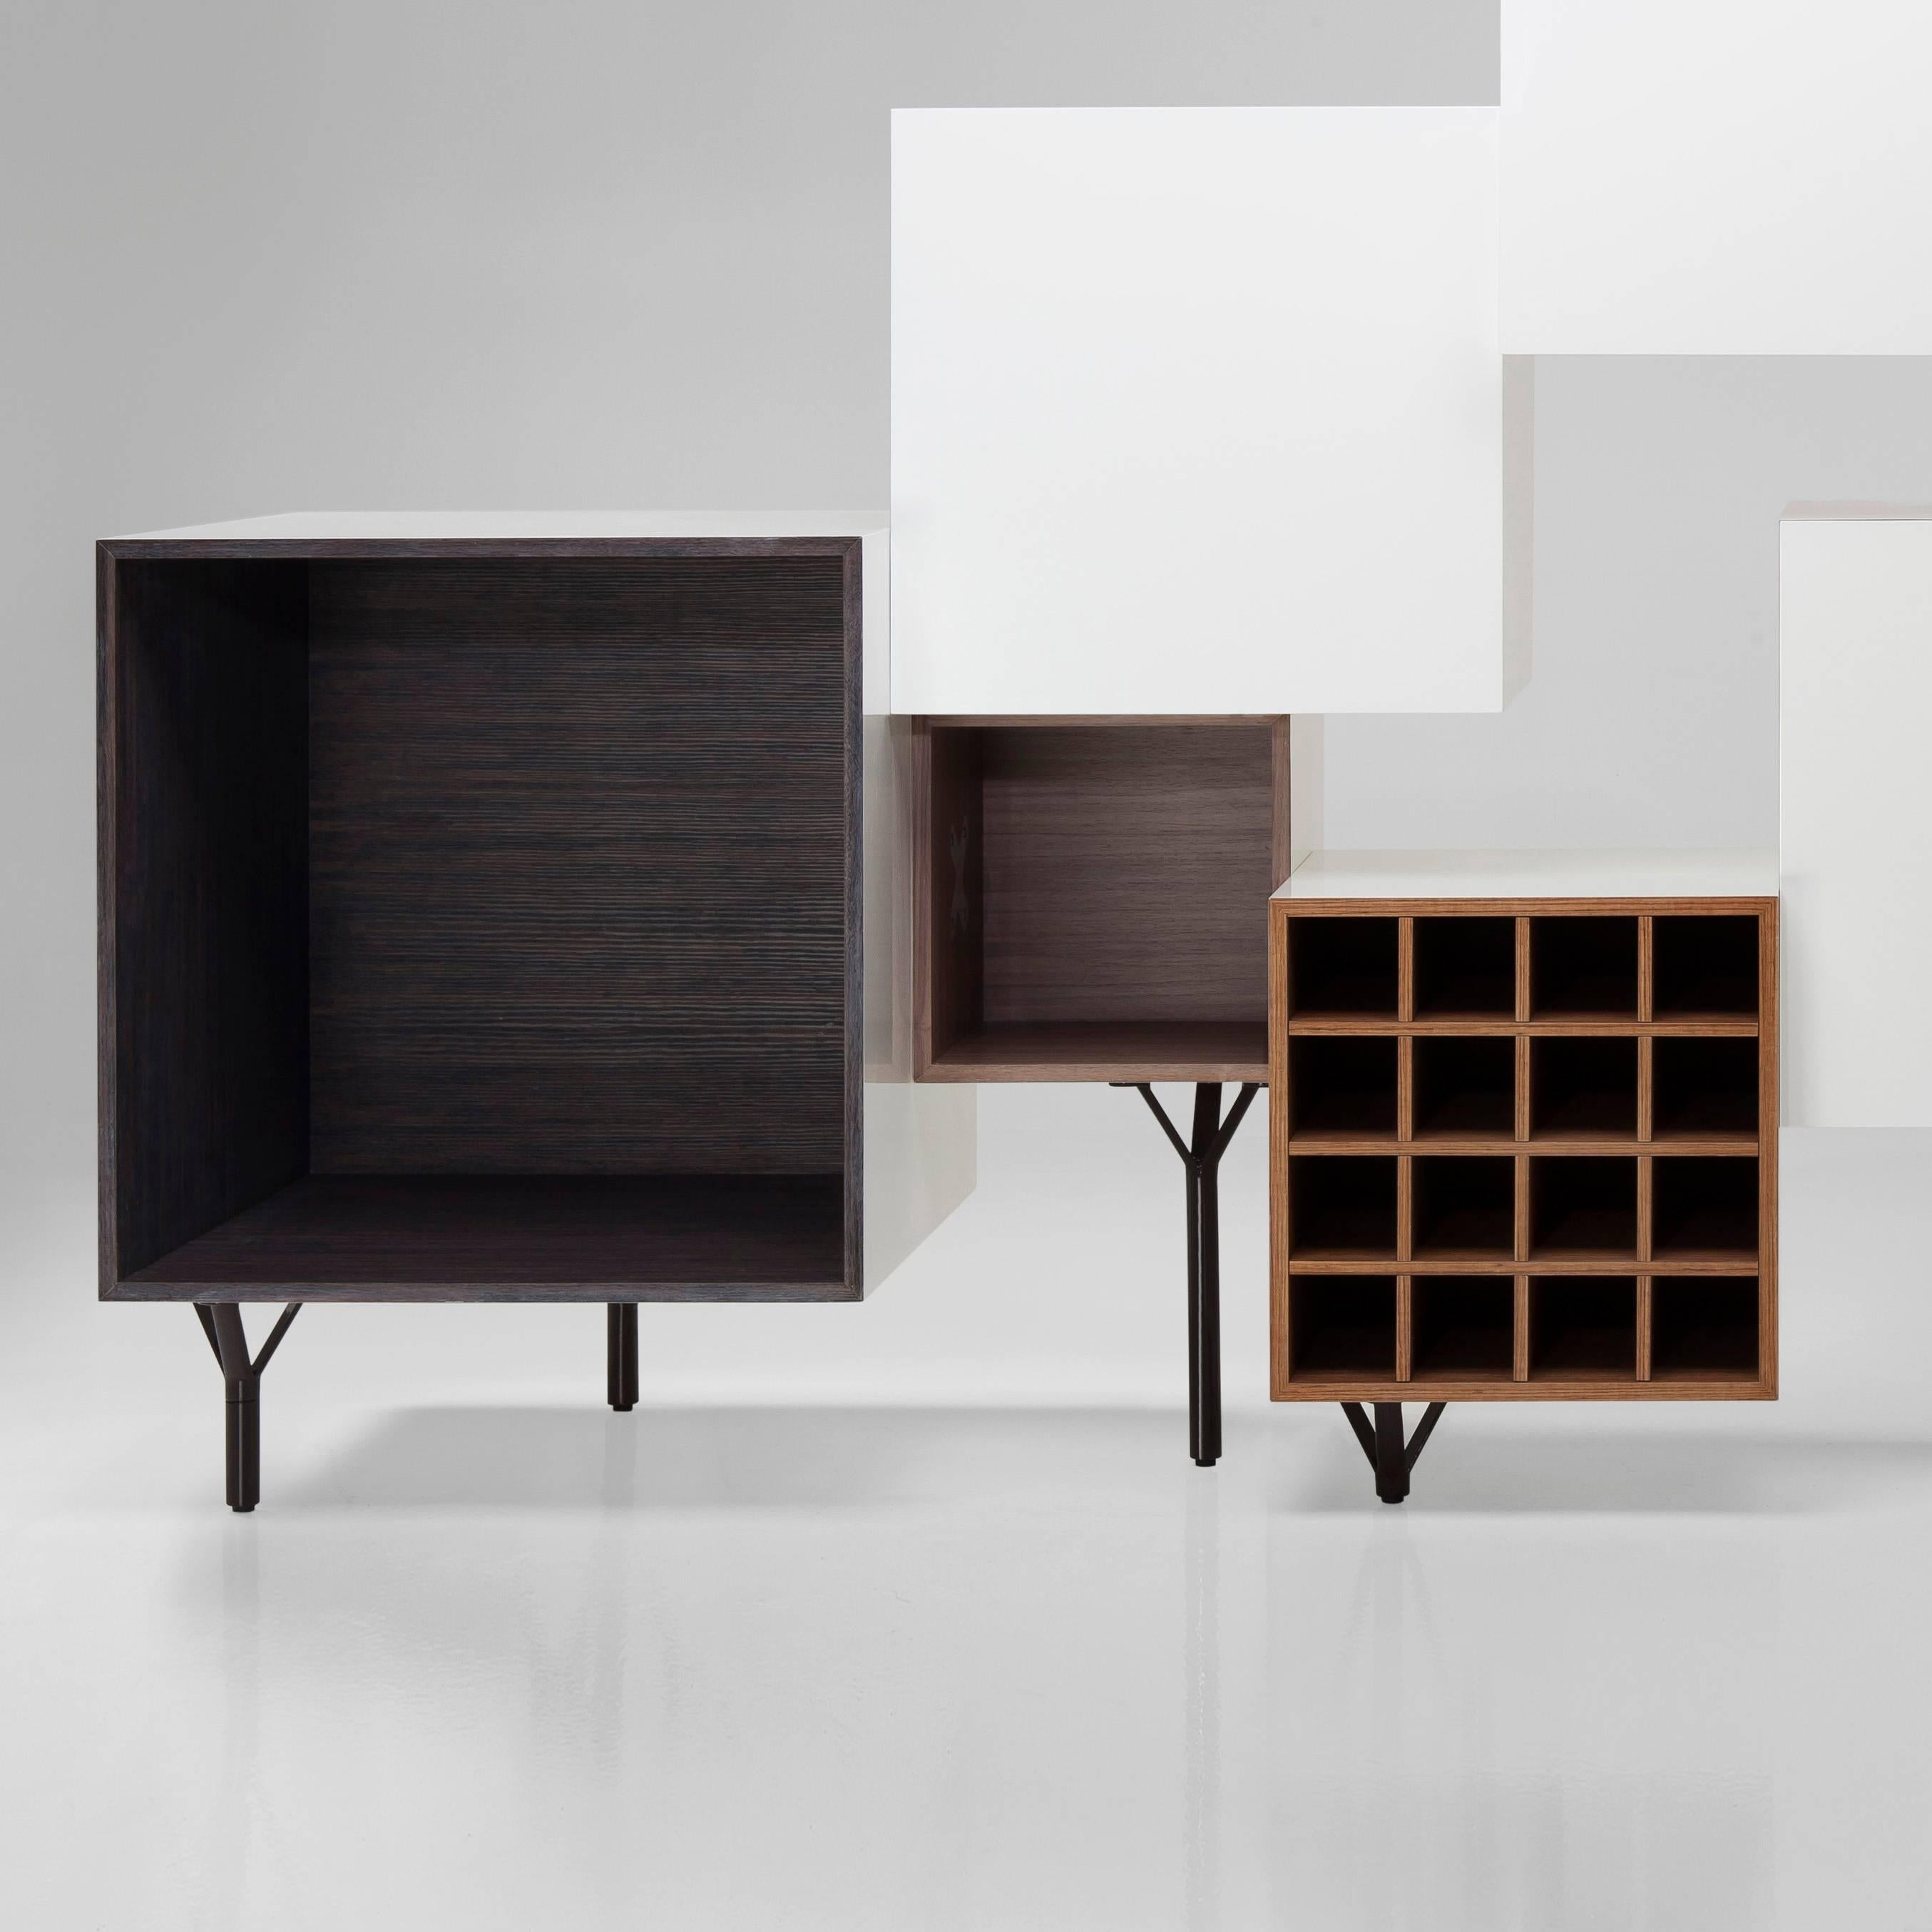 Cabinet designed by Martí Guixé in 2011 and manufactured by BD Barcelona.

This modular furniture is made of container cubes with various functions.They are dynamic both in their volume and in their positioning and finish.The woods, all different